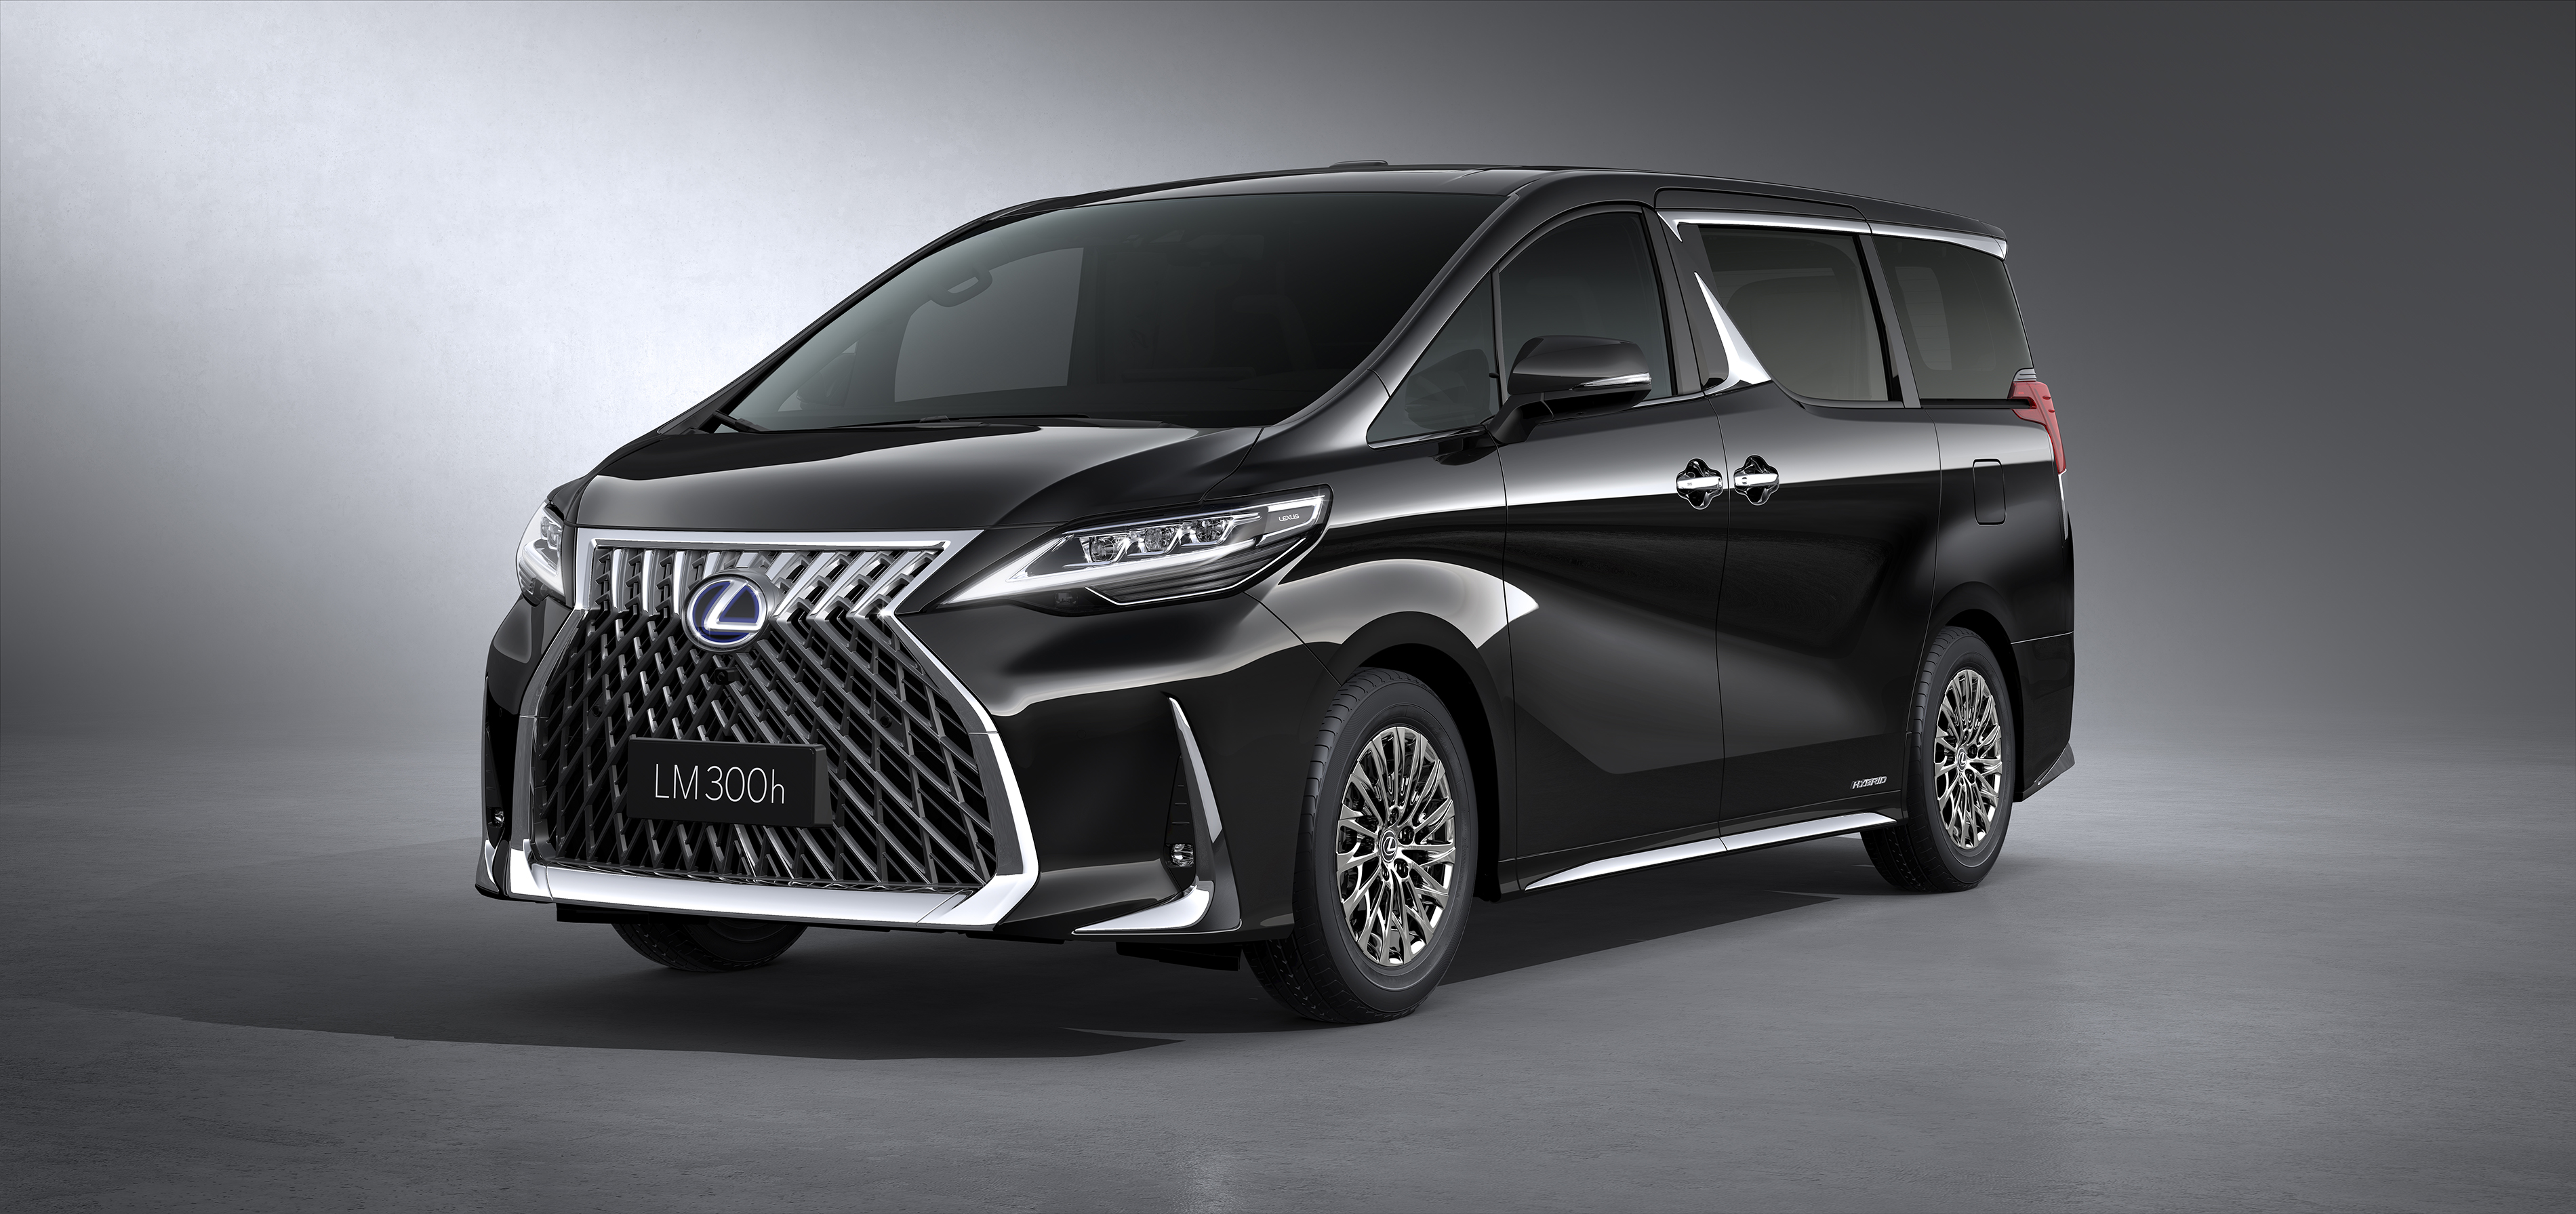 Lexus debuts the new Luxury Mover at 2019 Shanghai Motor Show